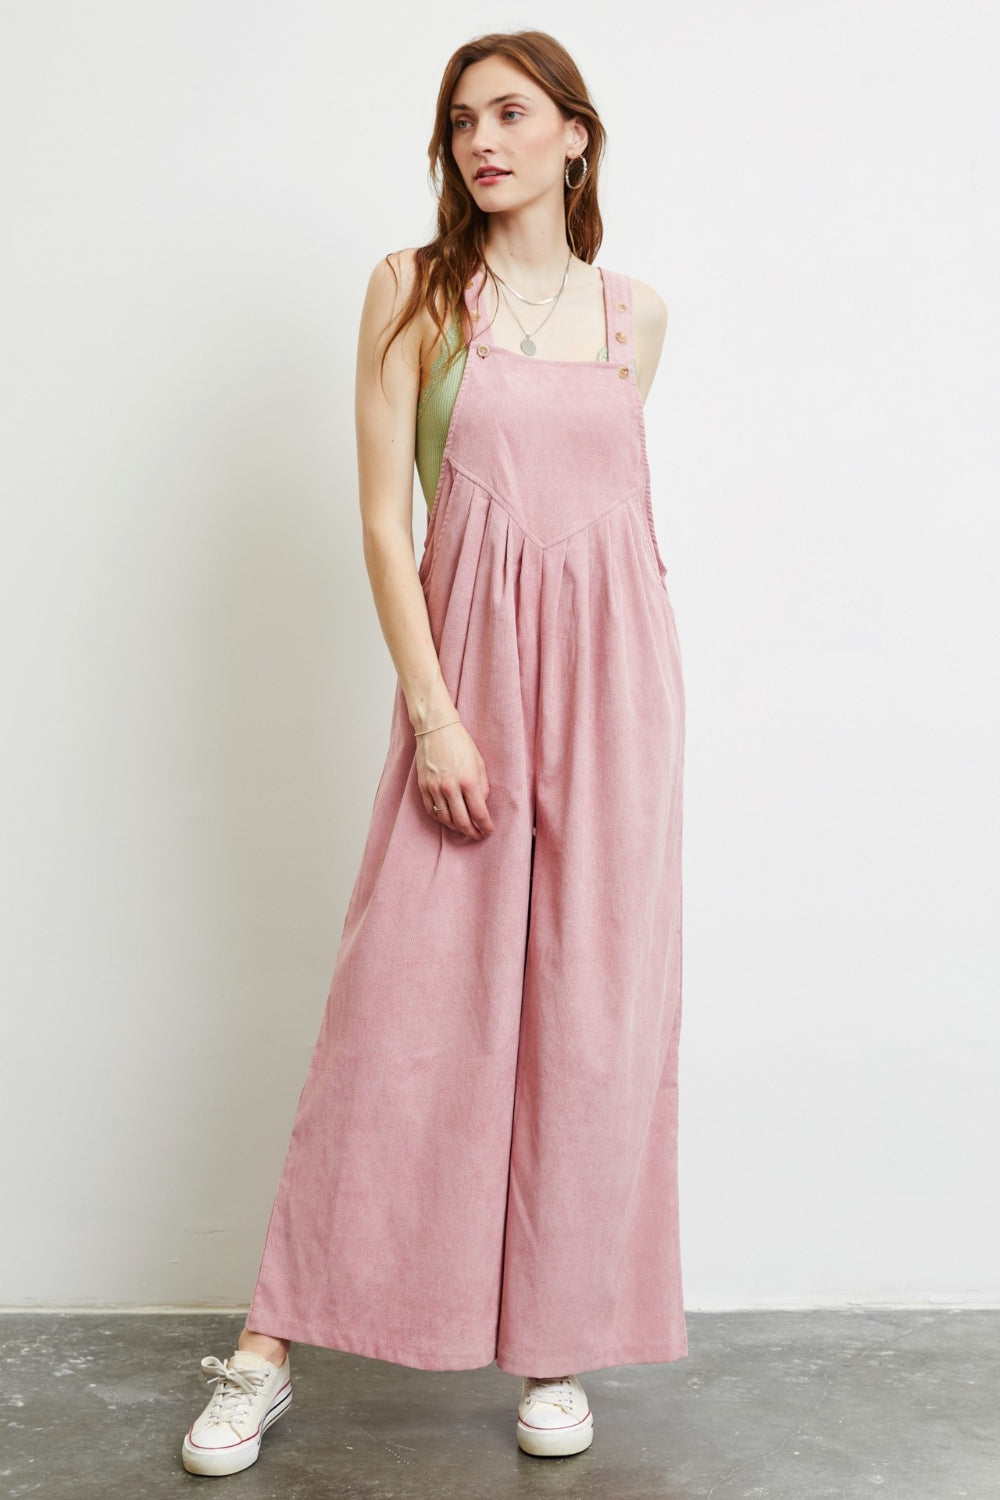 Summer Days Corduroy Sleeveless Wide-Leg Overalls in Powder Pink Southern Soul Collectives